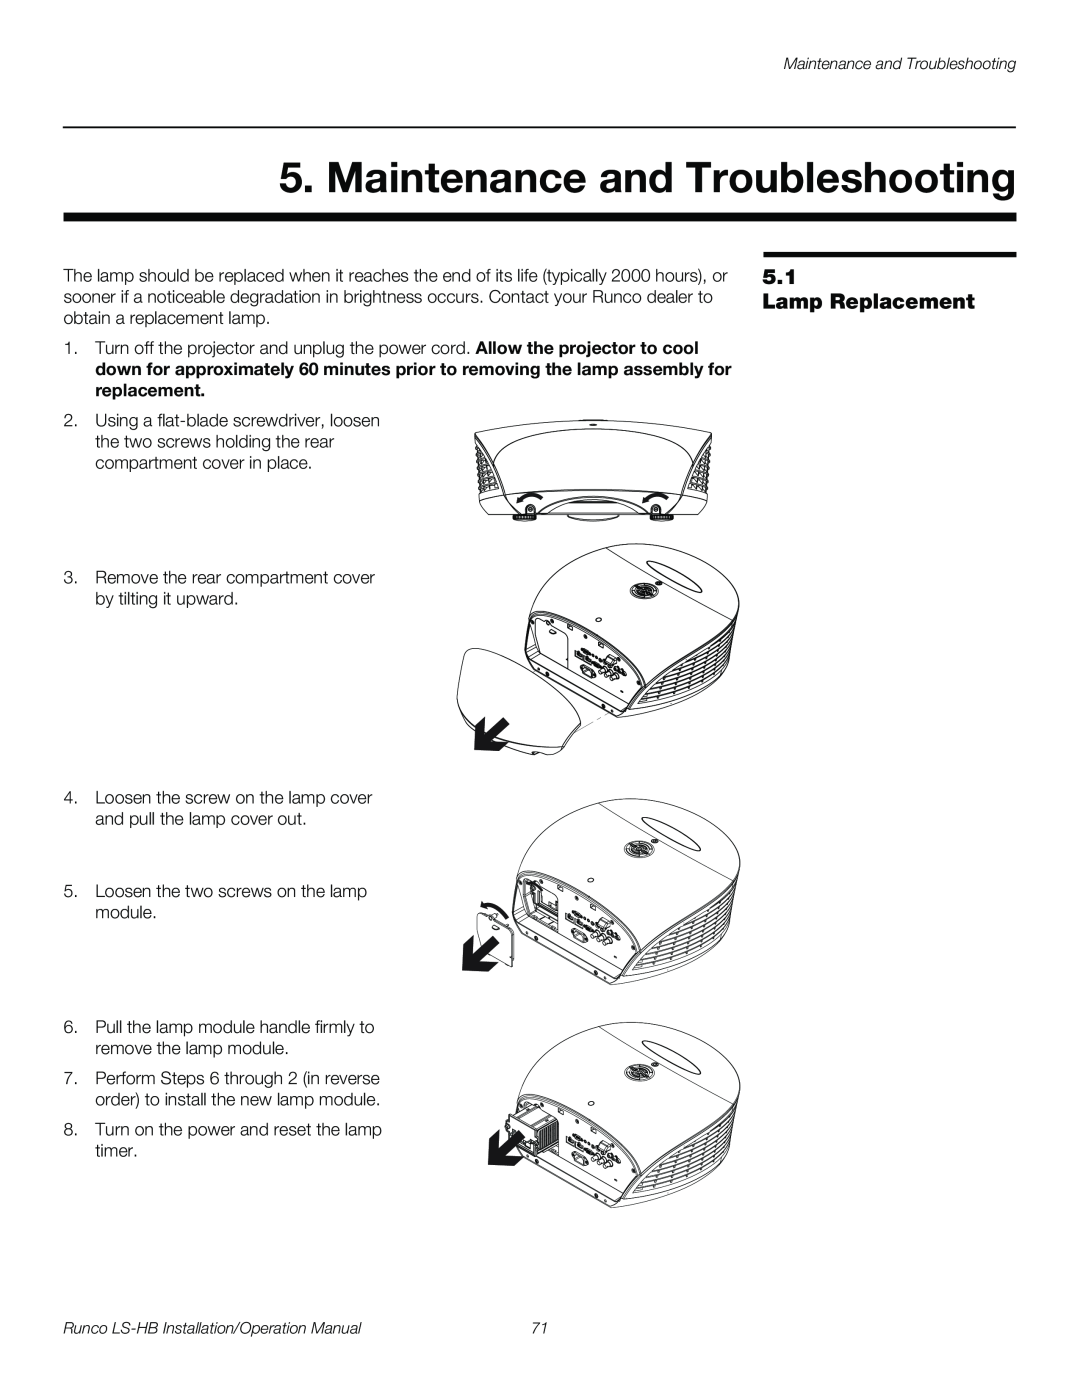 Runco LS-HB operation manual Maintenance and Troubleshooting, Lamp Replacement 